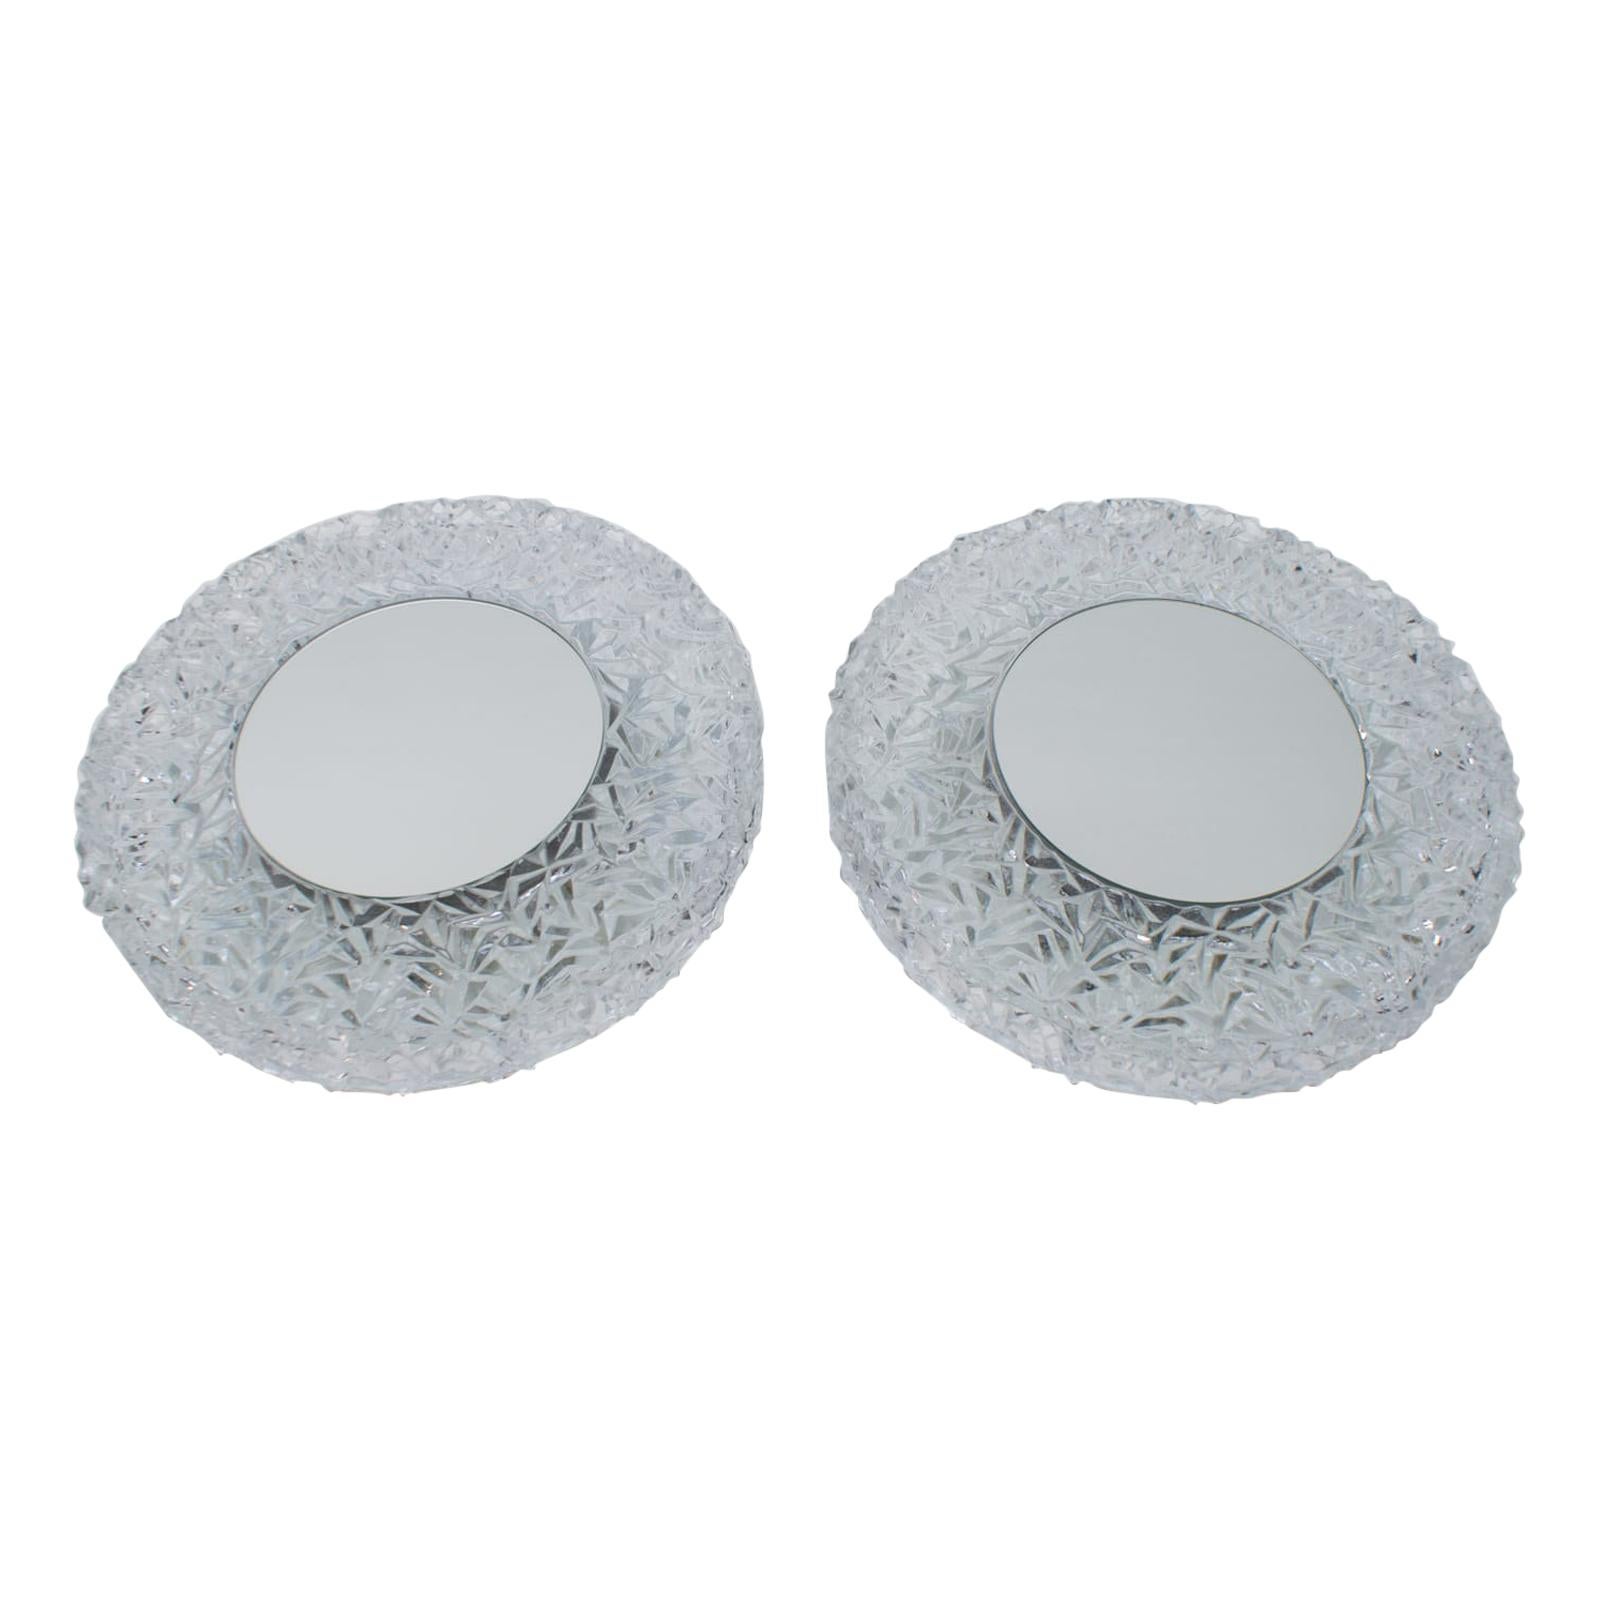 Set of 2 Textured Glass and Mirror Ceiling Wall Flushmounts, Hillebrand, 1960s